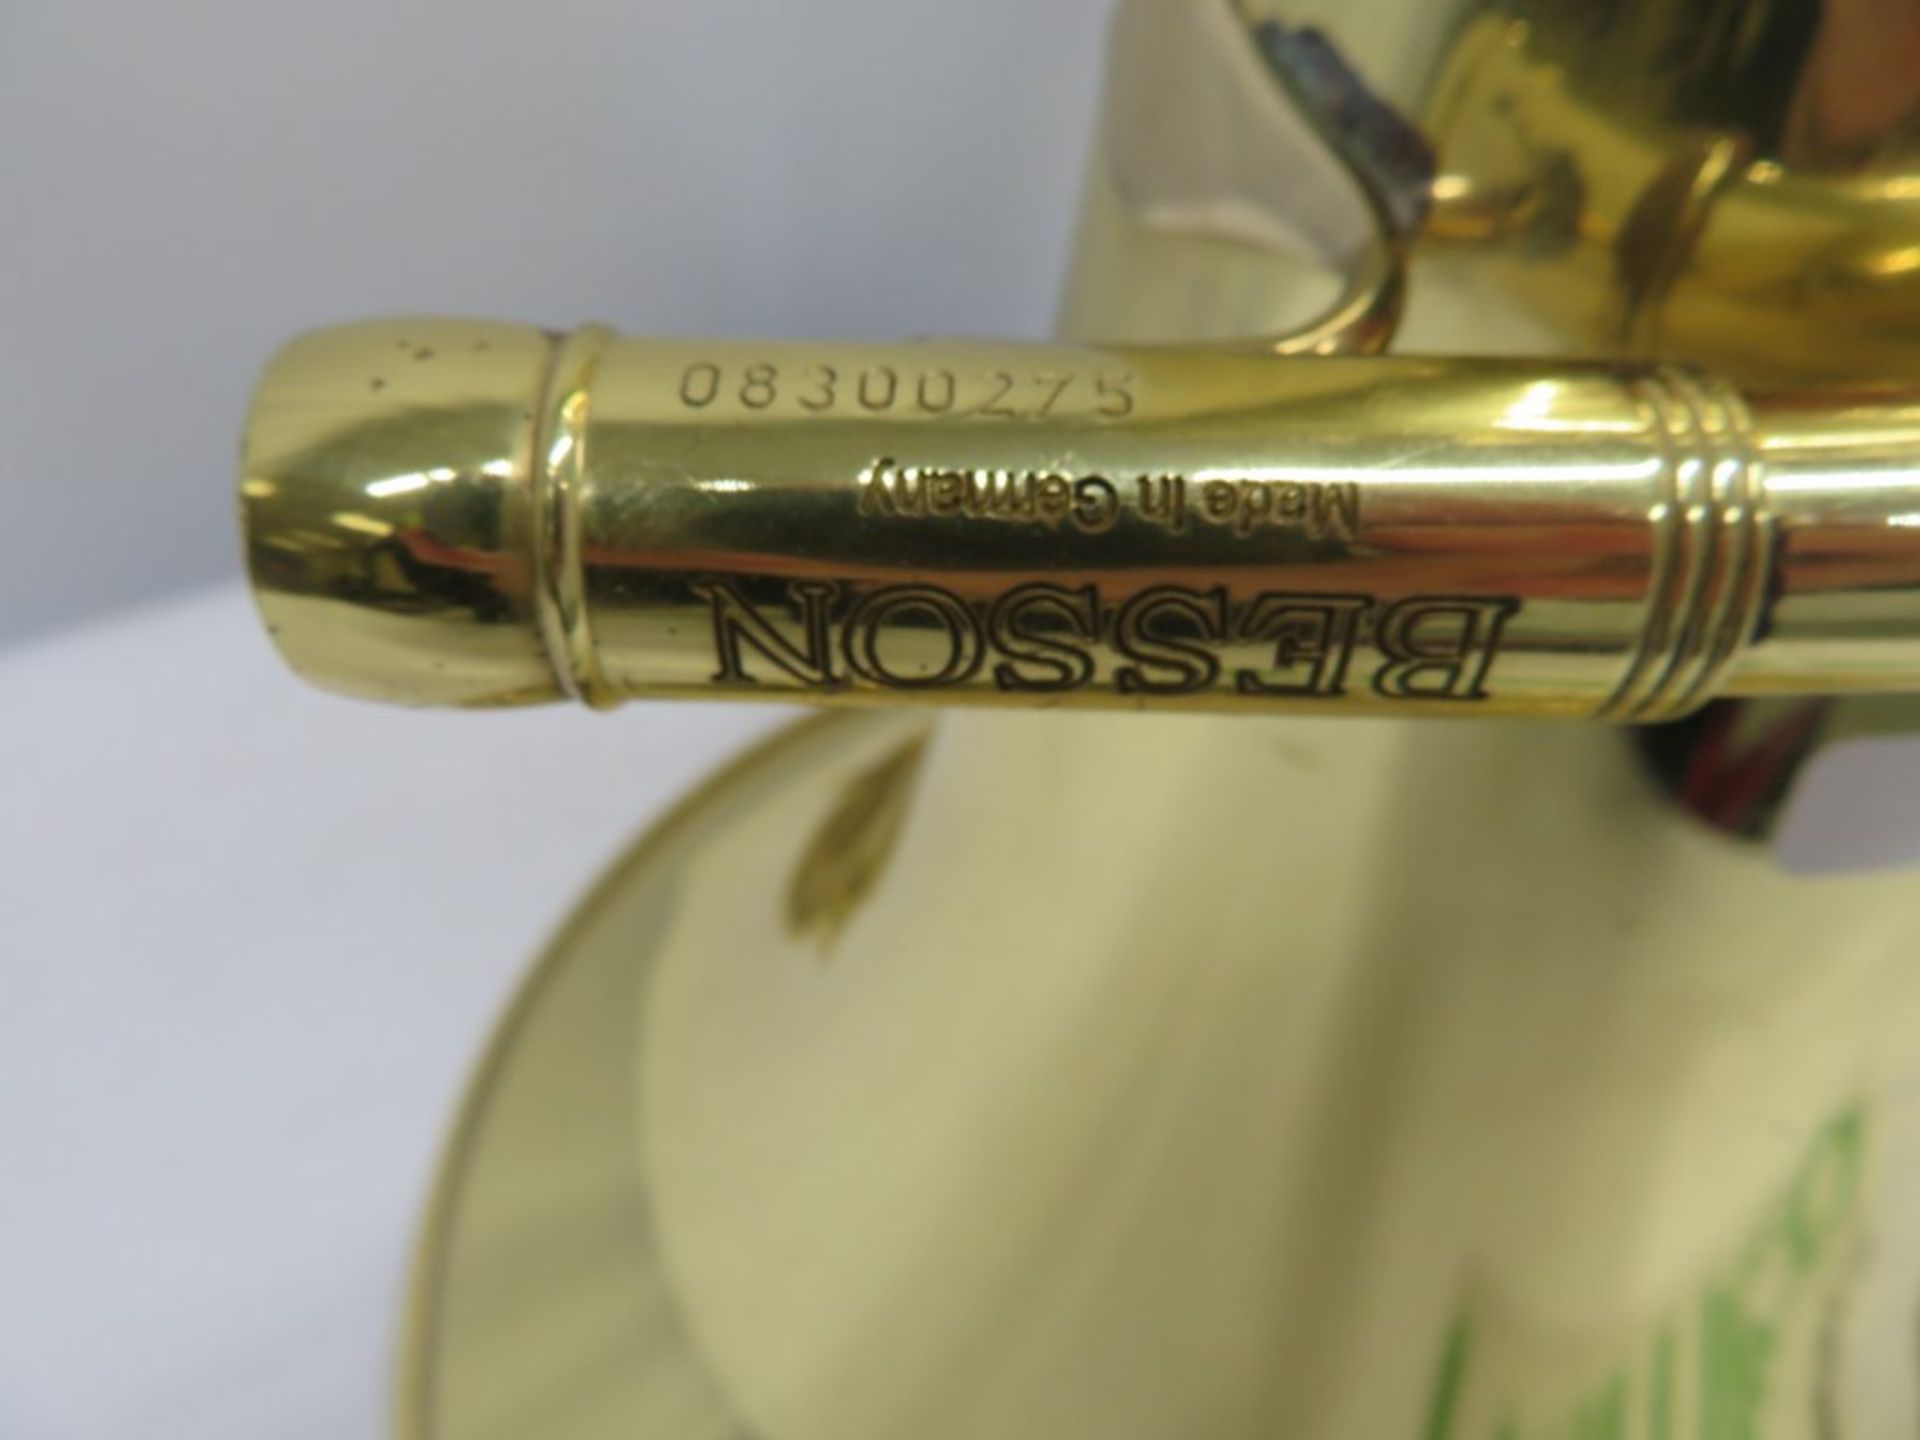 Besson Prestige BE2052 Euphonium With Case. Serial Number: 08300275. Please Note This Ite - Image 8 of 16